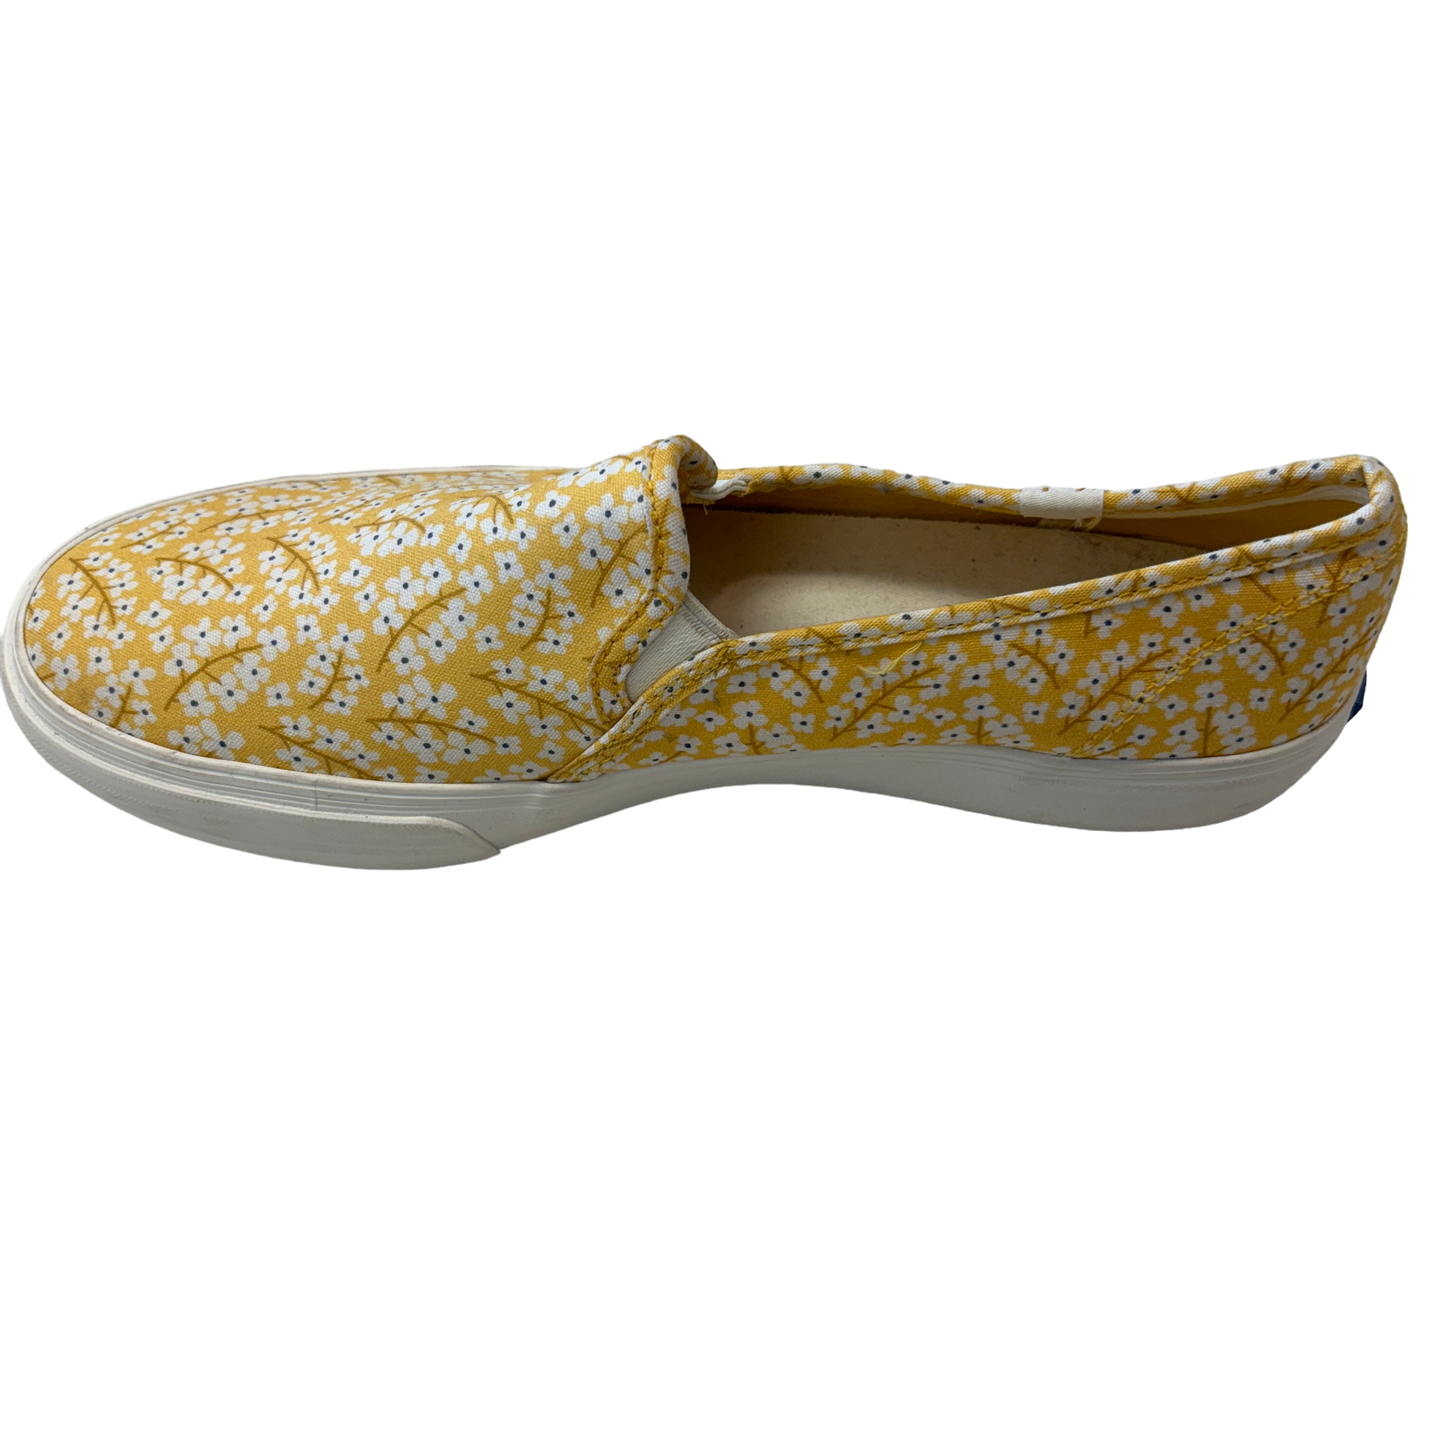 Shoes Flats Espadrille By Keds  Size: 11